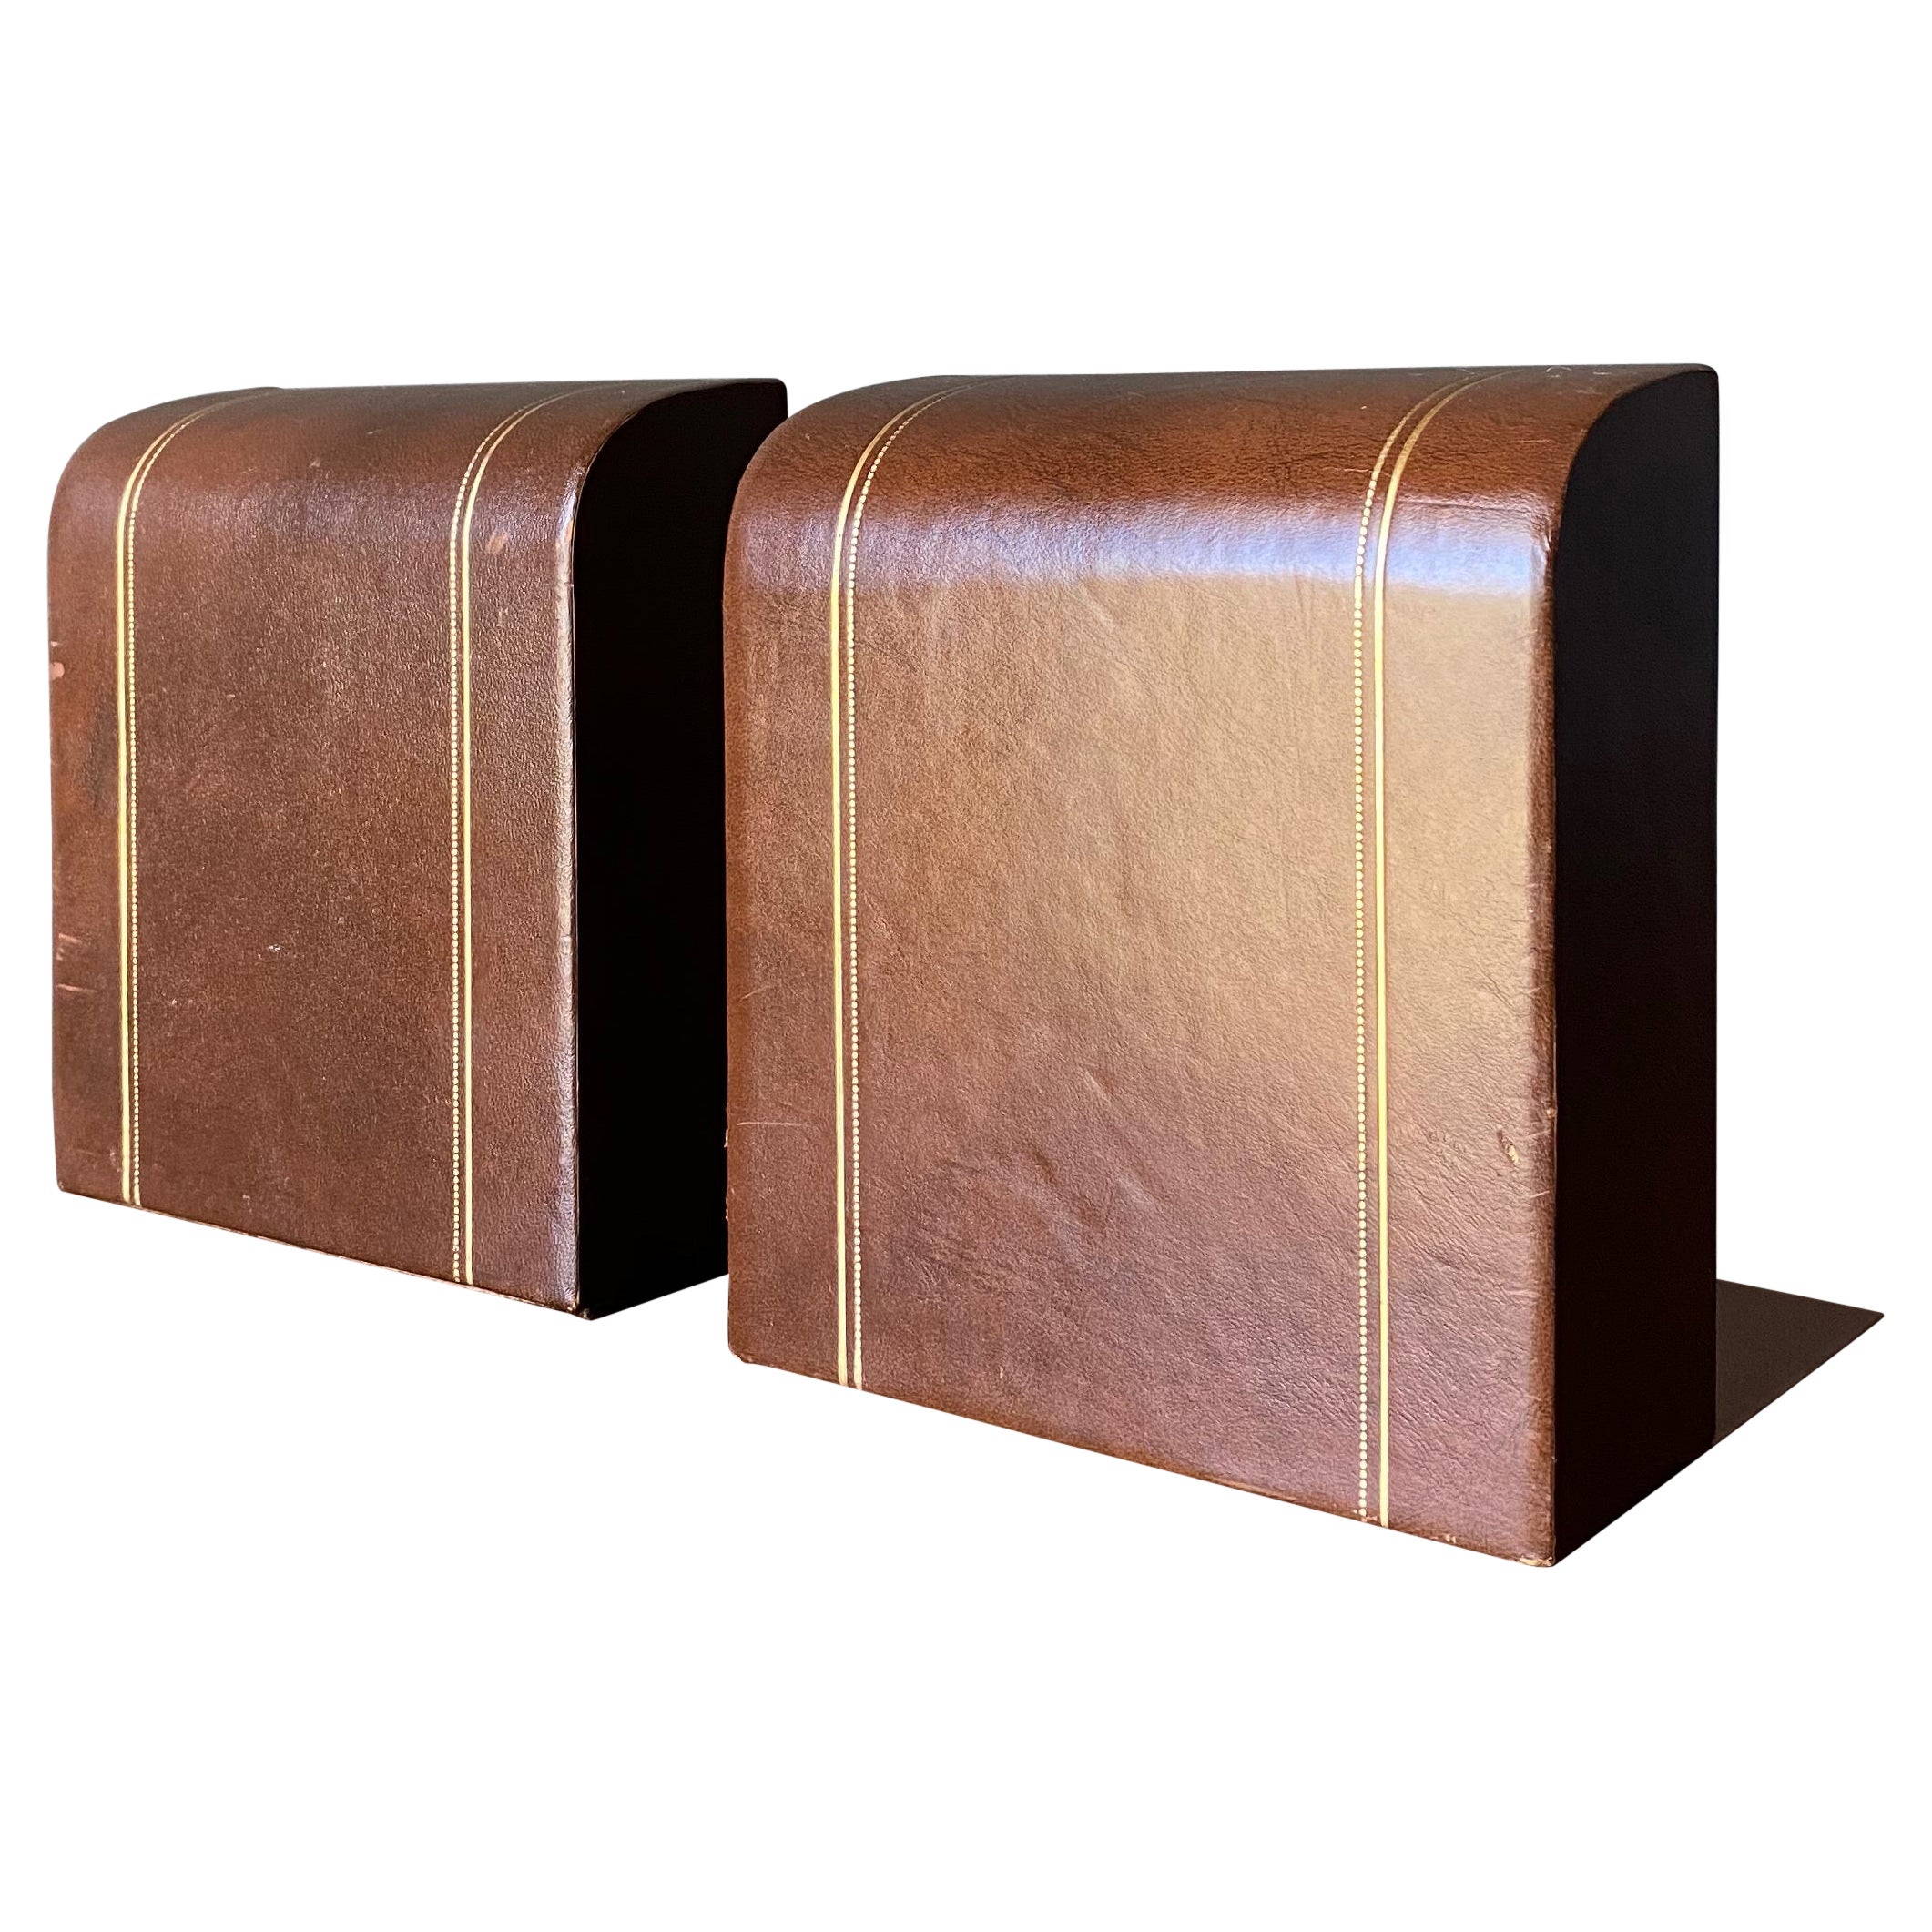 Pair of Brown Leather Bookends, circa 1970